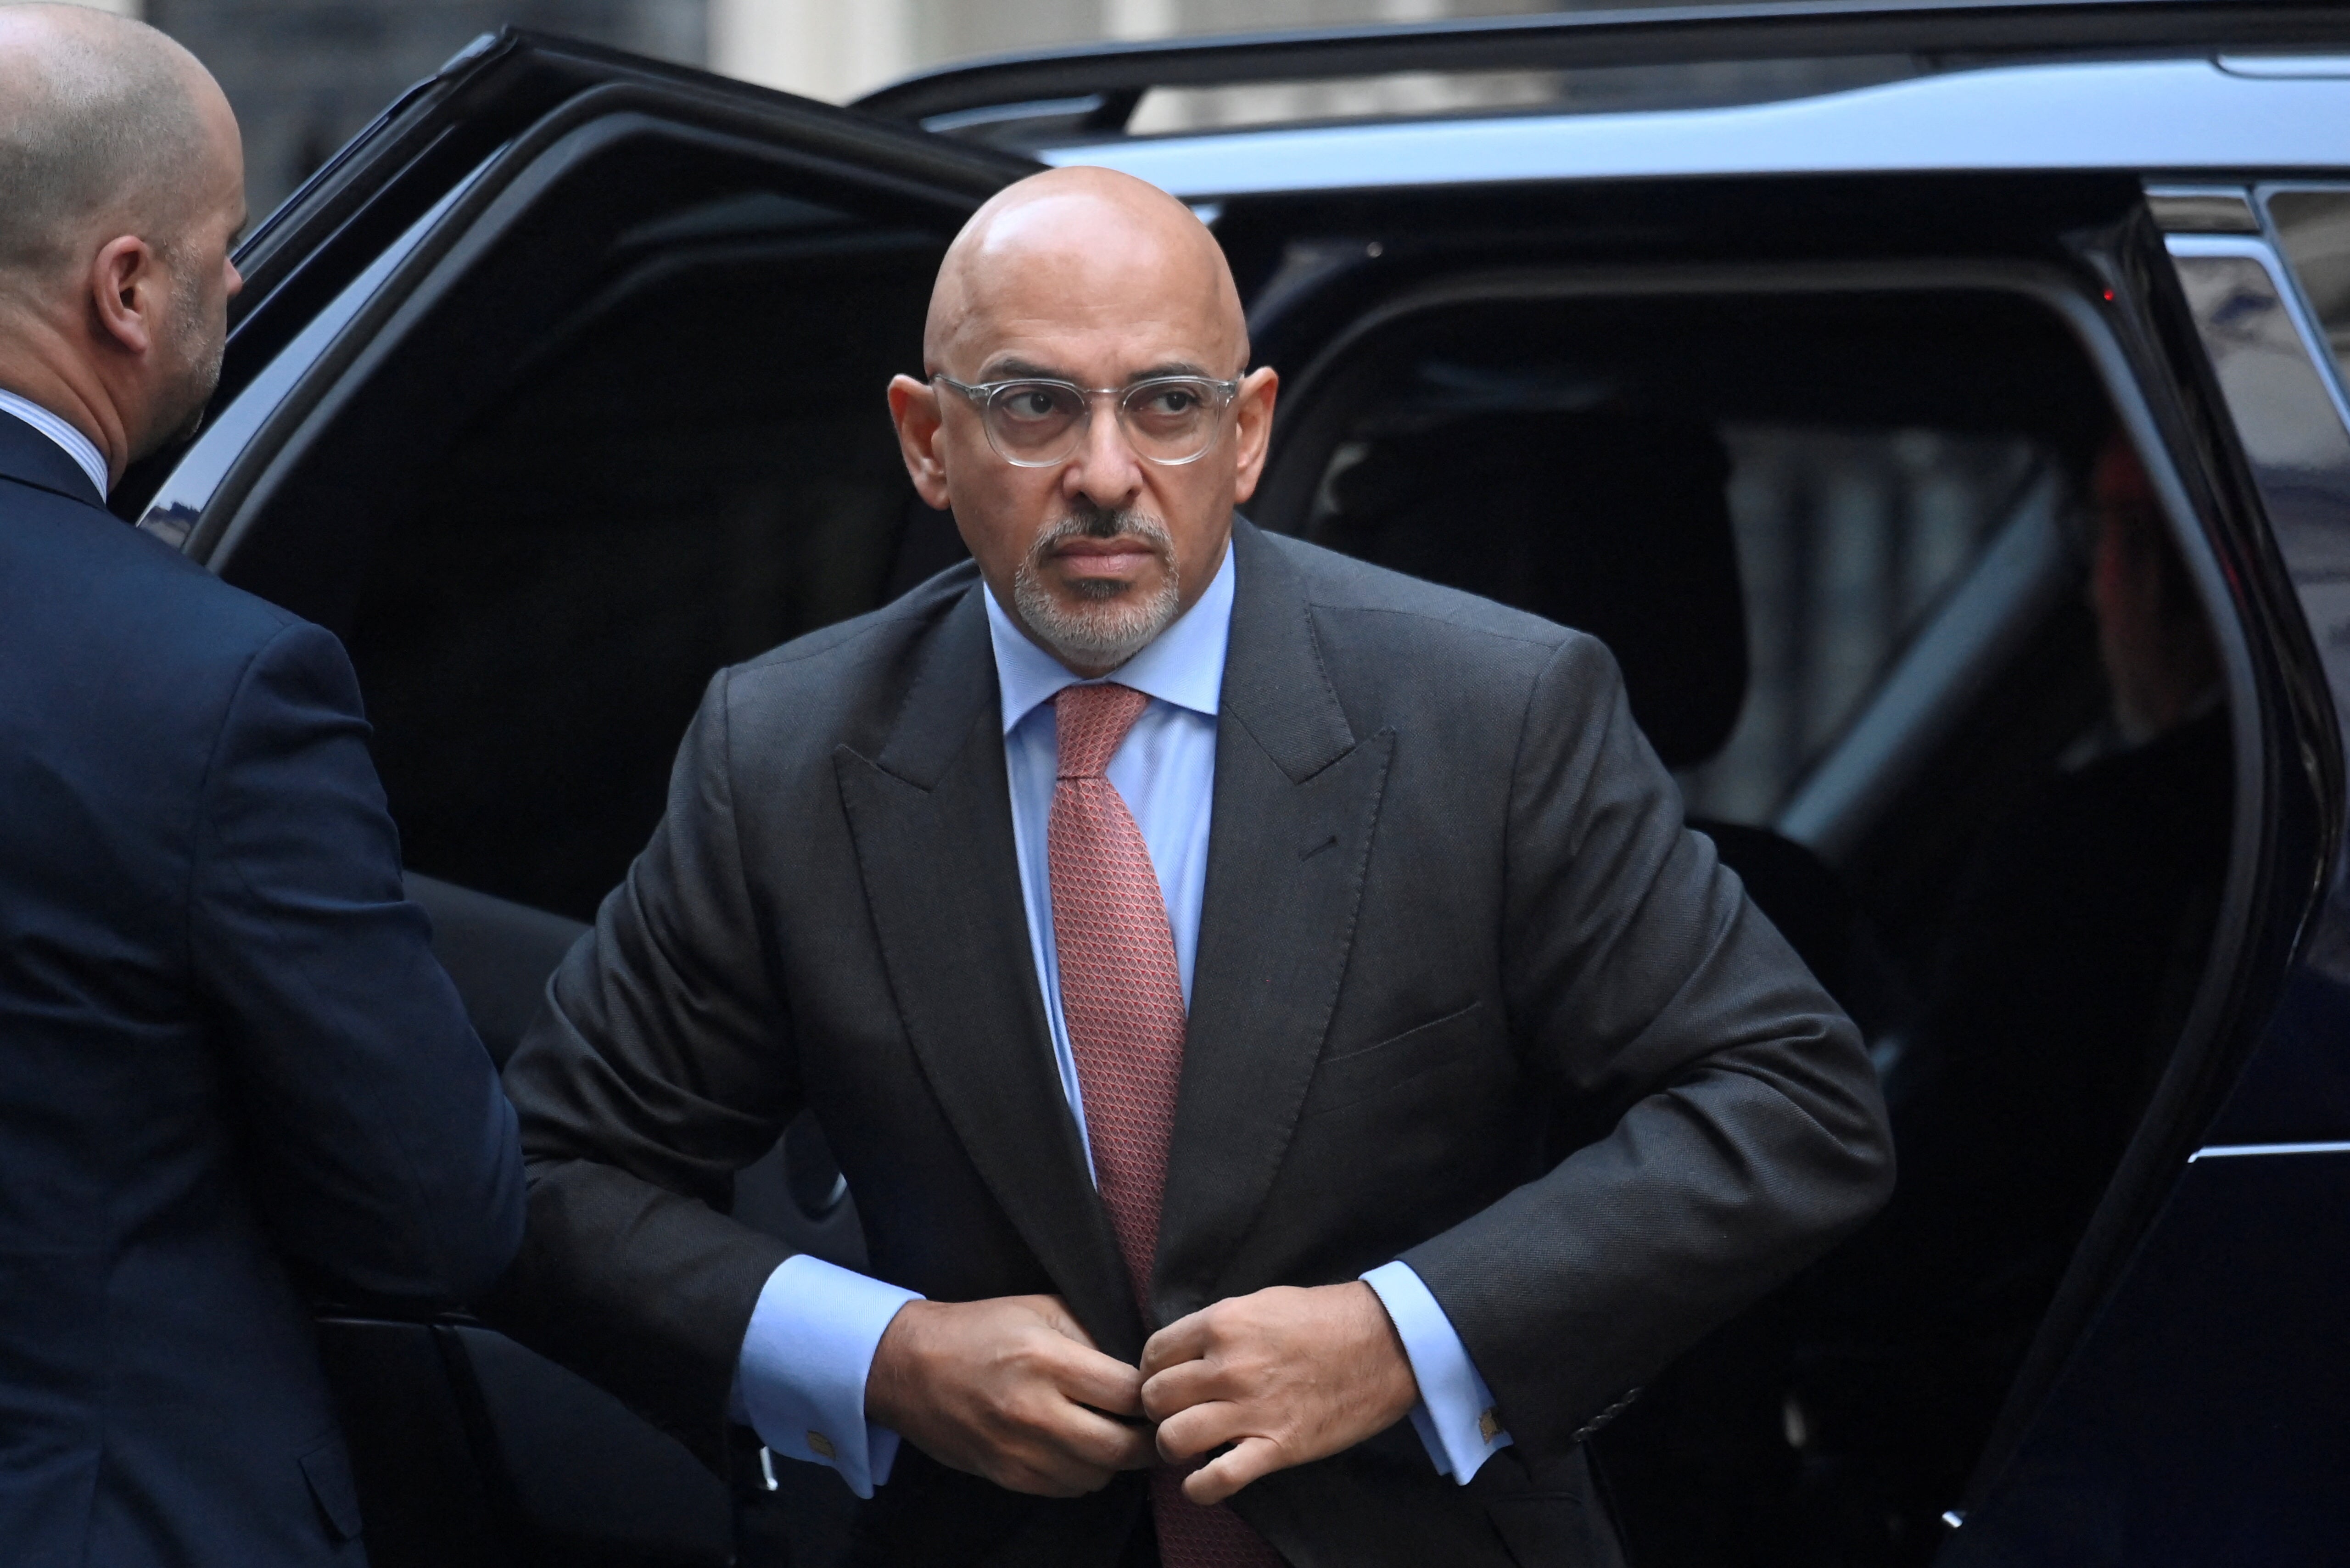 Nadhim Zahawi has said he ‘does not recognise institutional racism in the party’